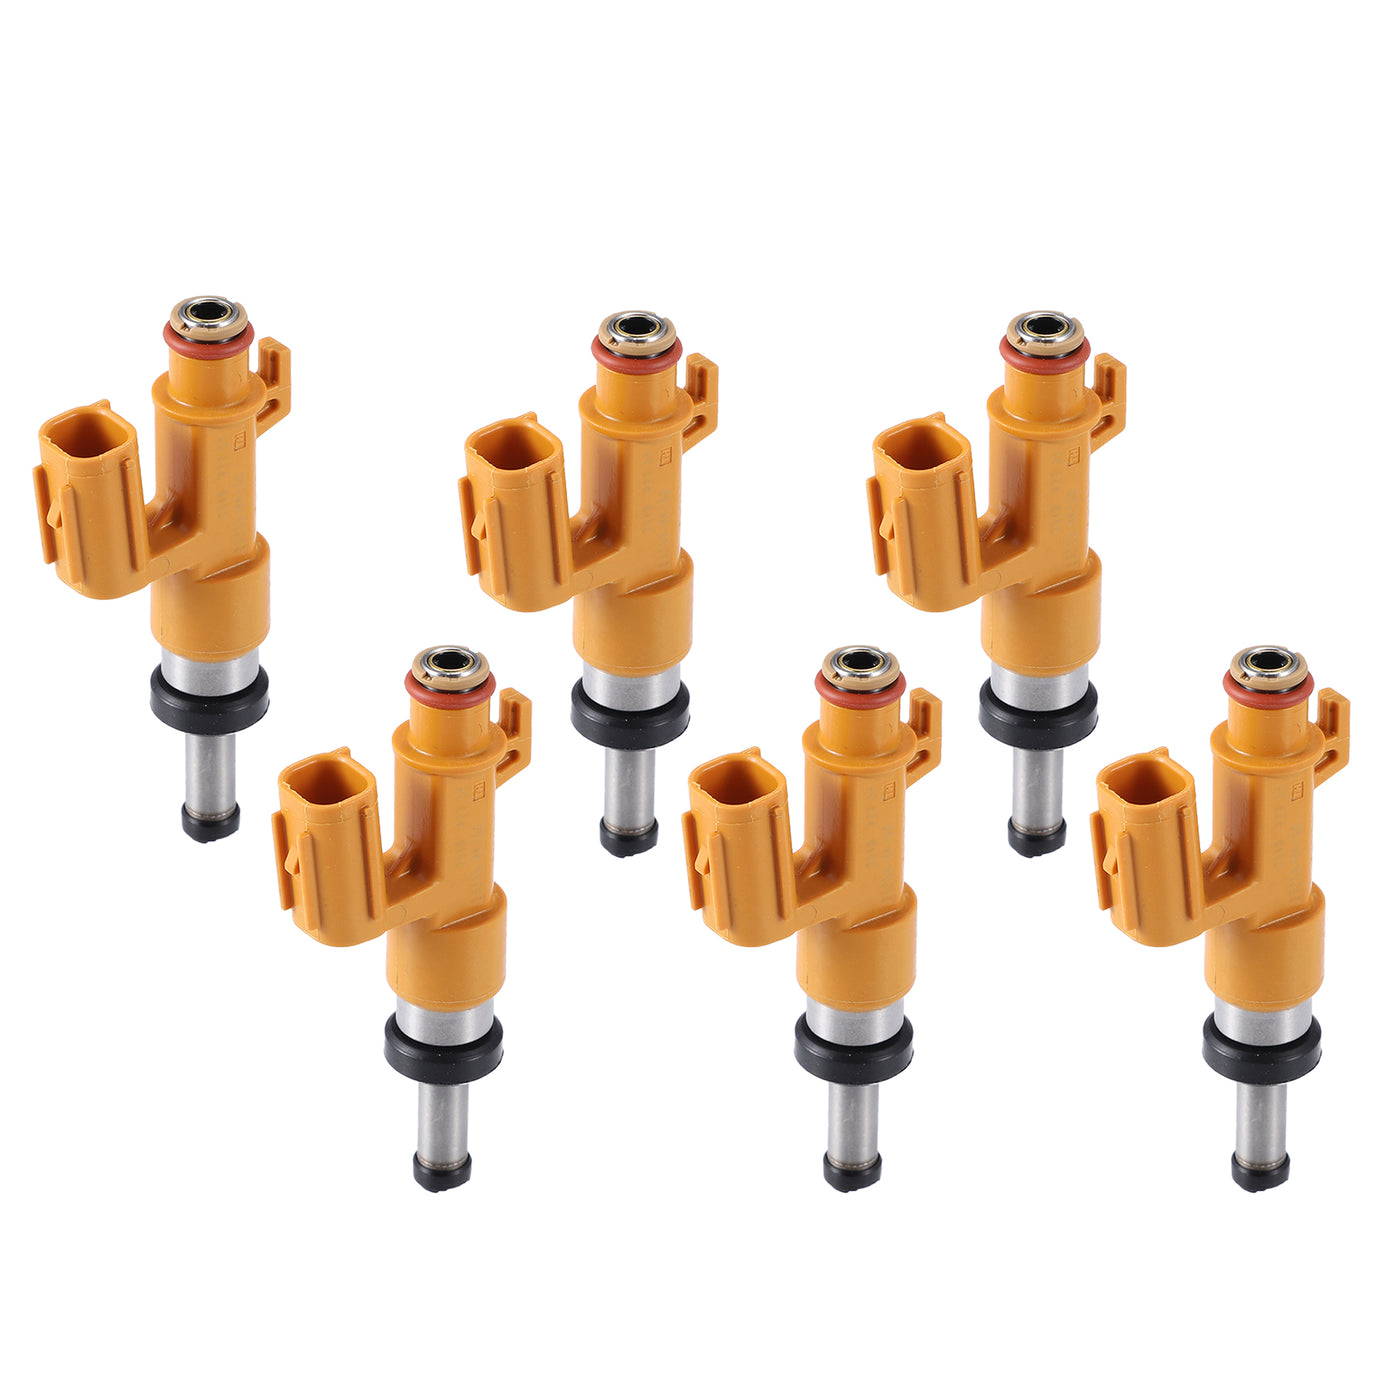 ACROPIX Car Fuel Injector Nozzle Replacement Fit for Toyota Avalon 3.5L 2019-2020 No.23209-09330 - Pack of 6